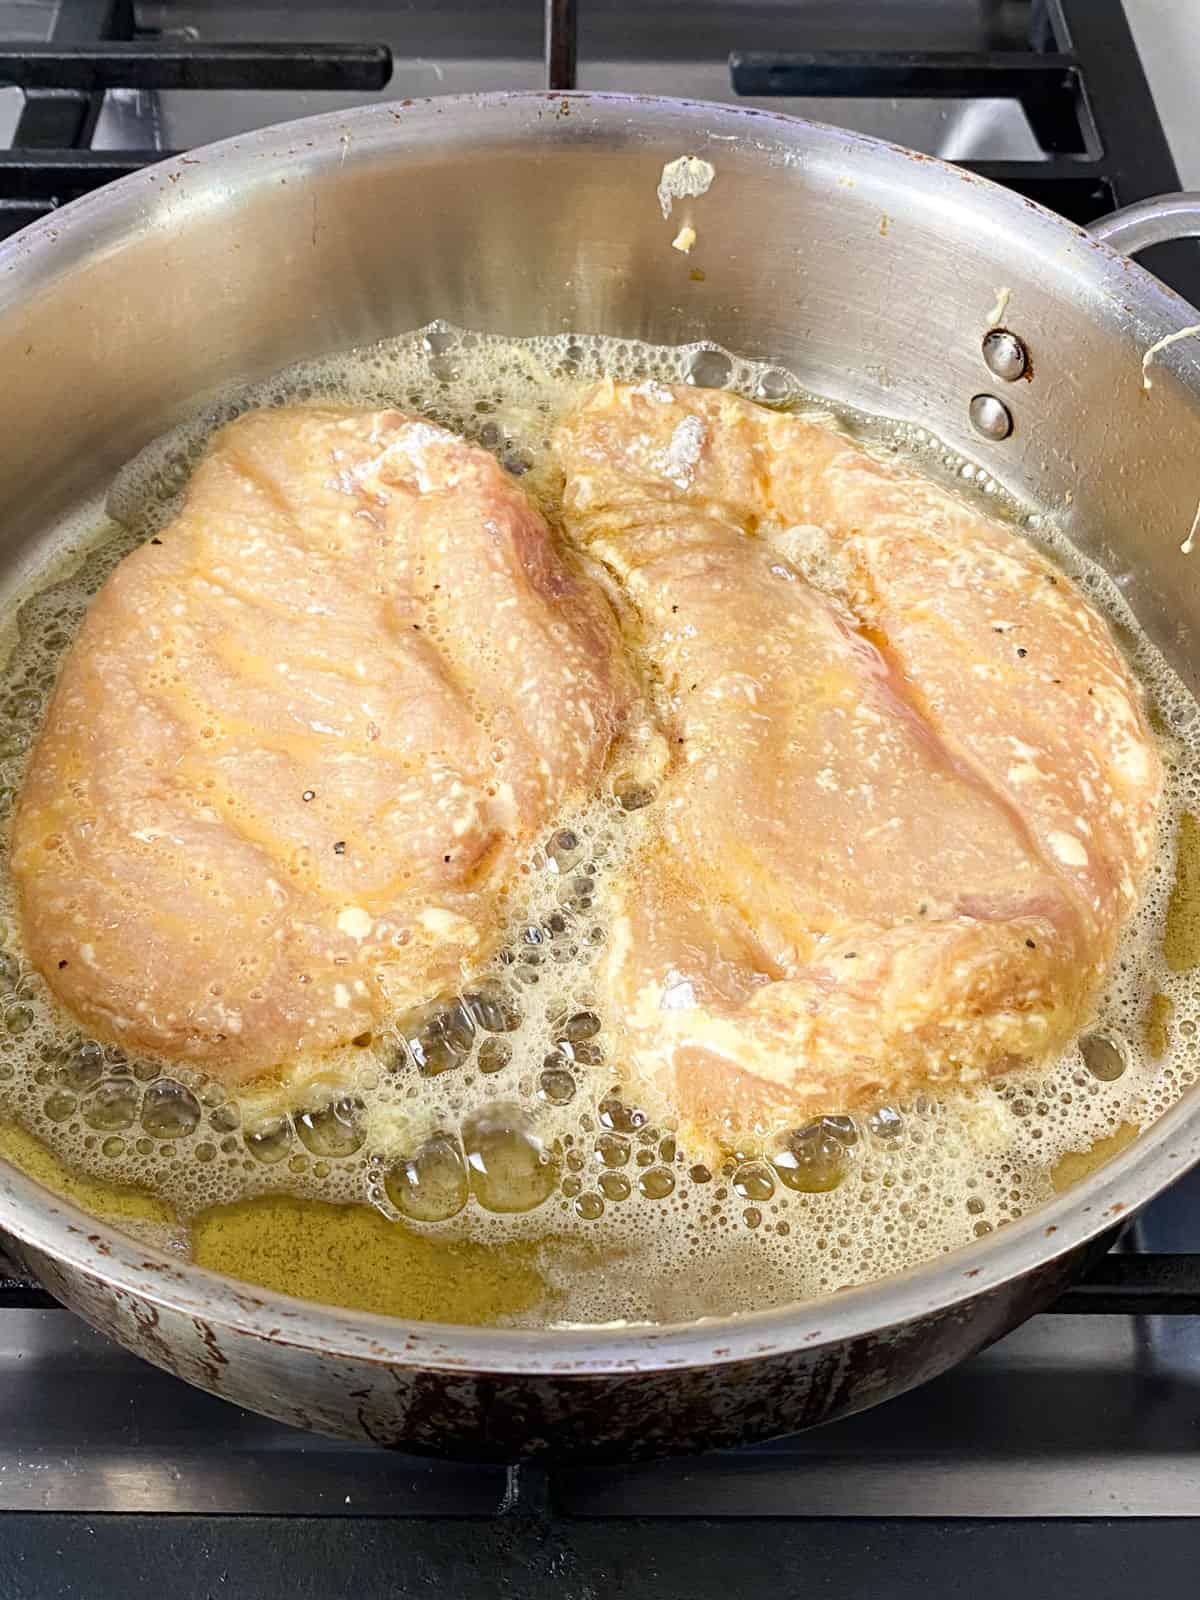 Cook the chicken cutlets on th first side until golden brown.